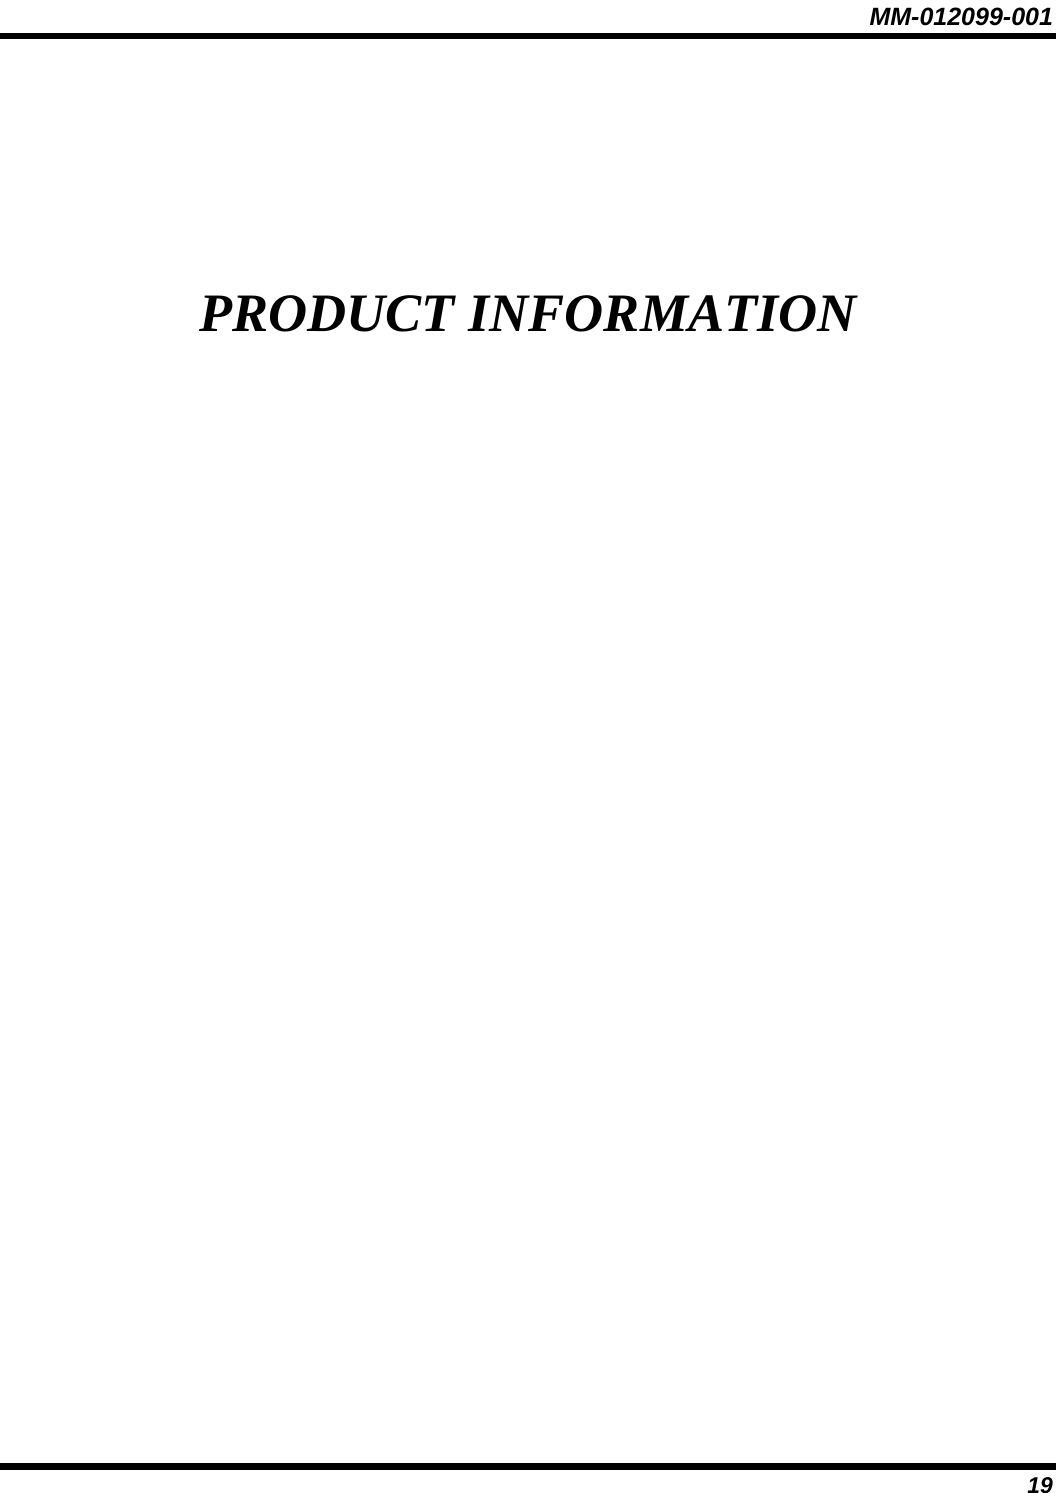 MM-012099-001 19 PRODUCT INFORMATION 